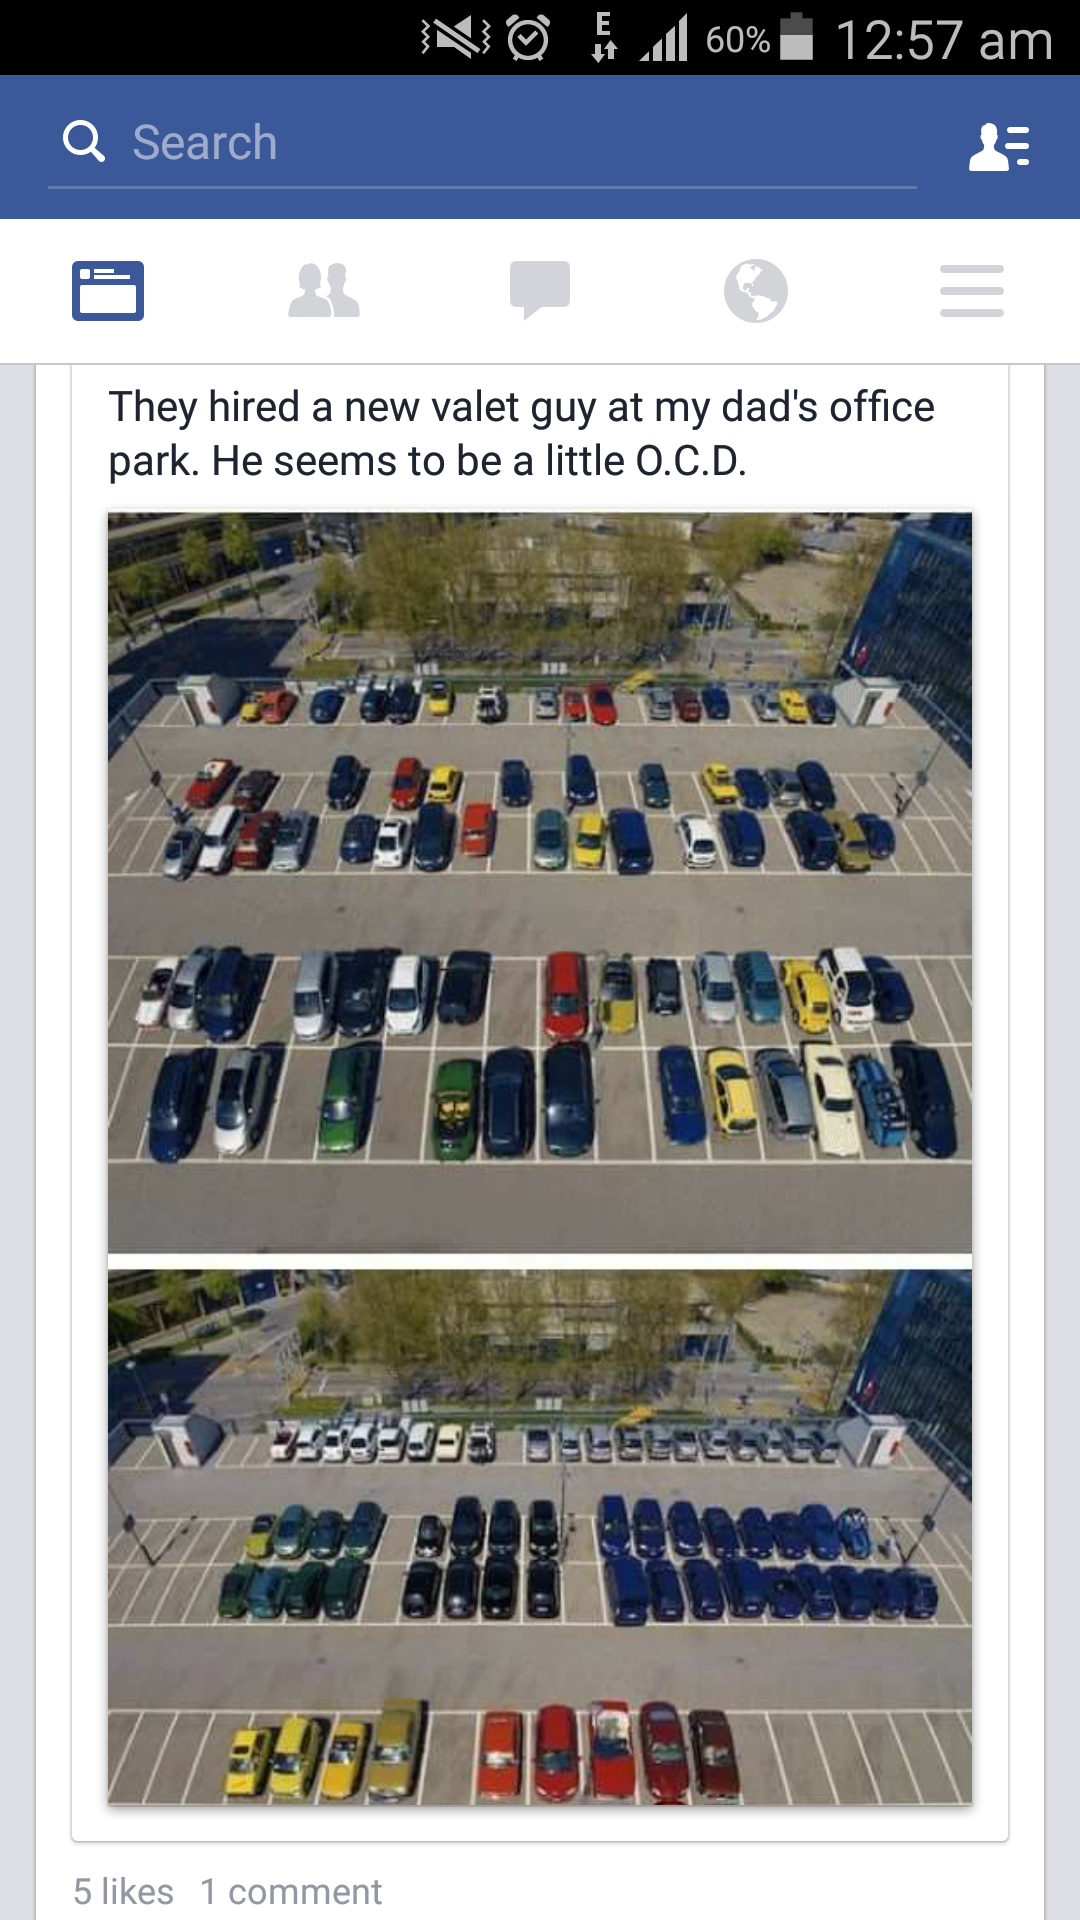 ocd valet parking - No 60% Q Search They hired a new valet guy at my dad's office park. He seems to be a little O.C.D. 9558 Deleee 5 1 comment